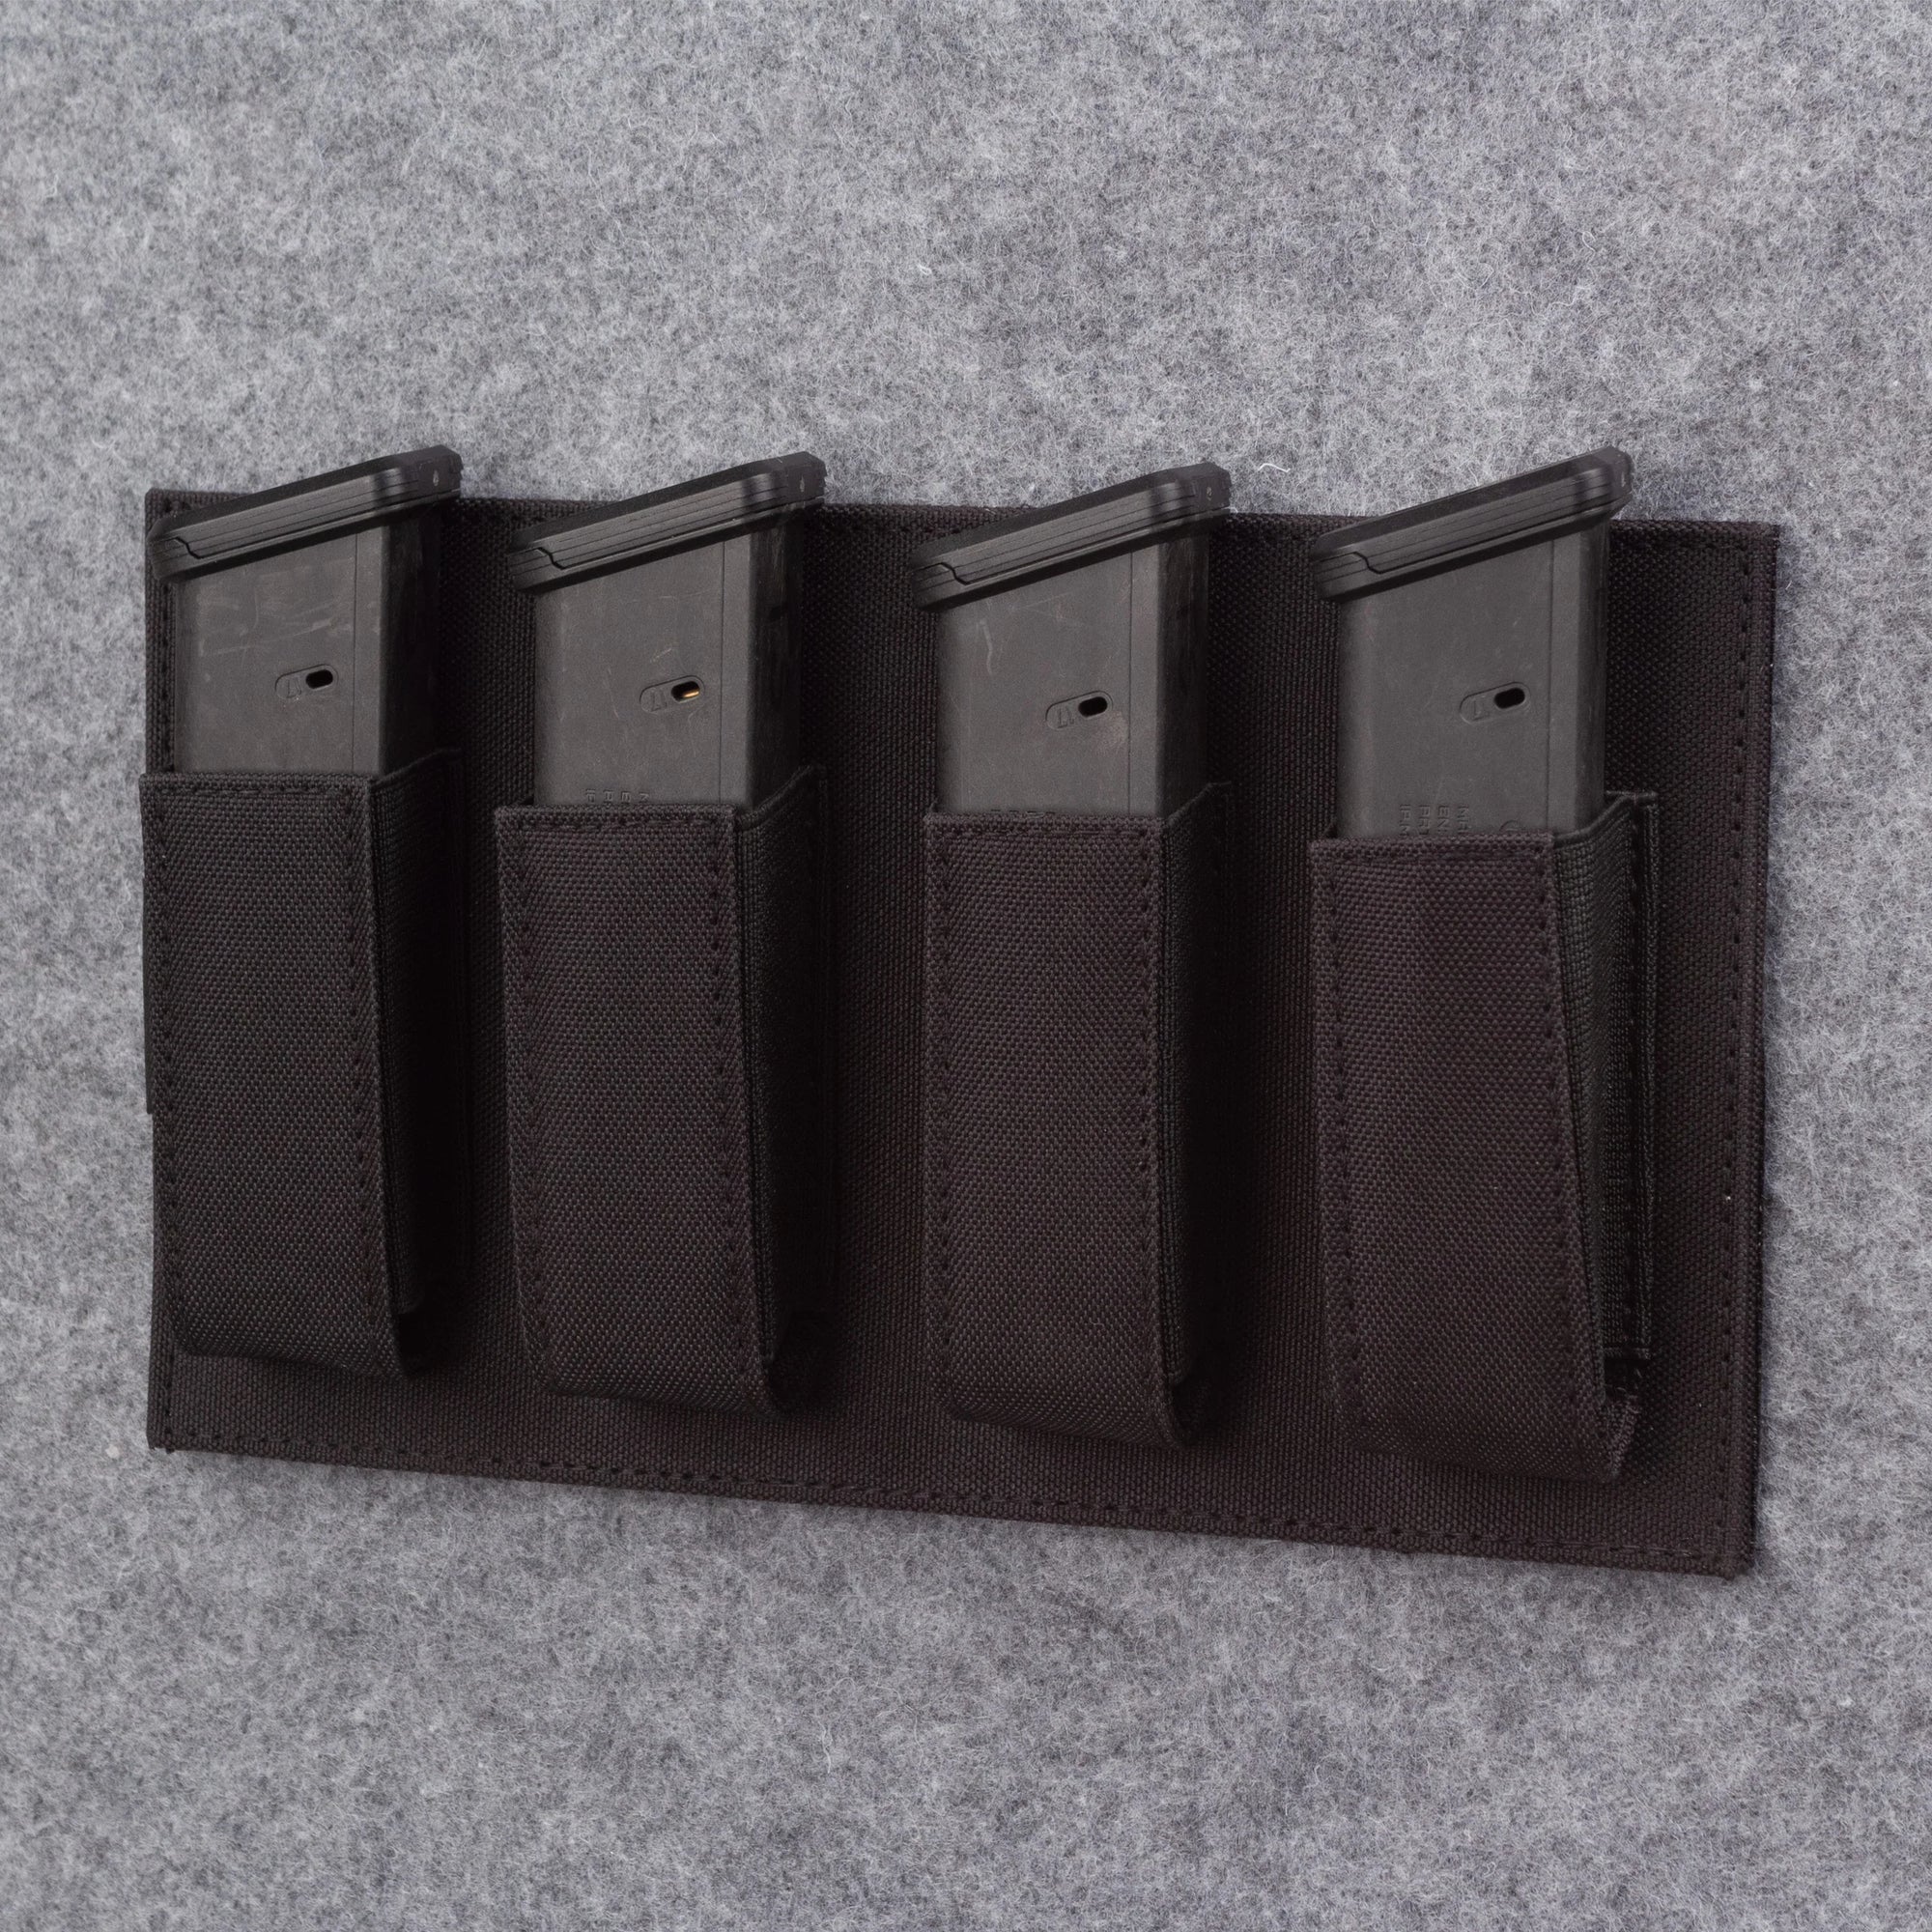 Tracker PPM4 4 Pistol Mag Holder with Mags